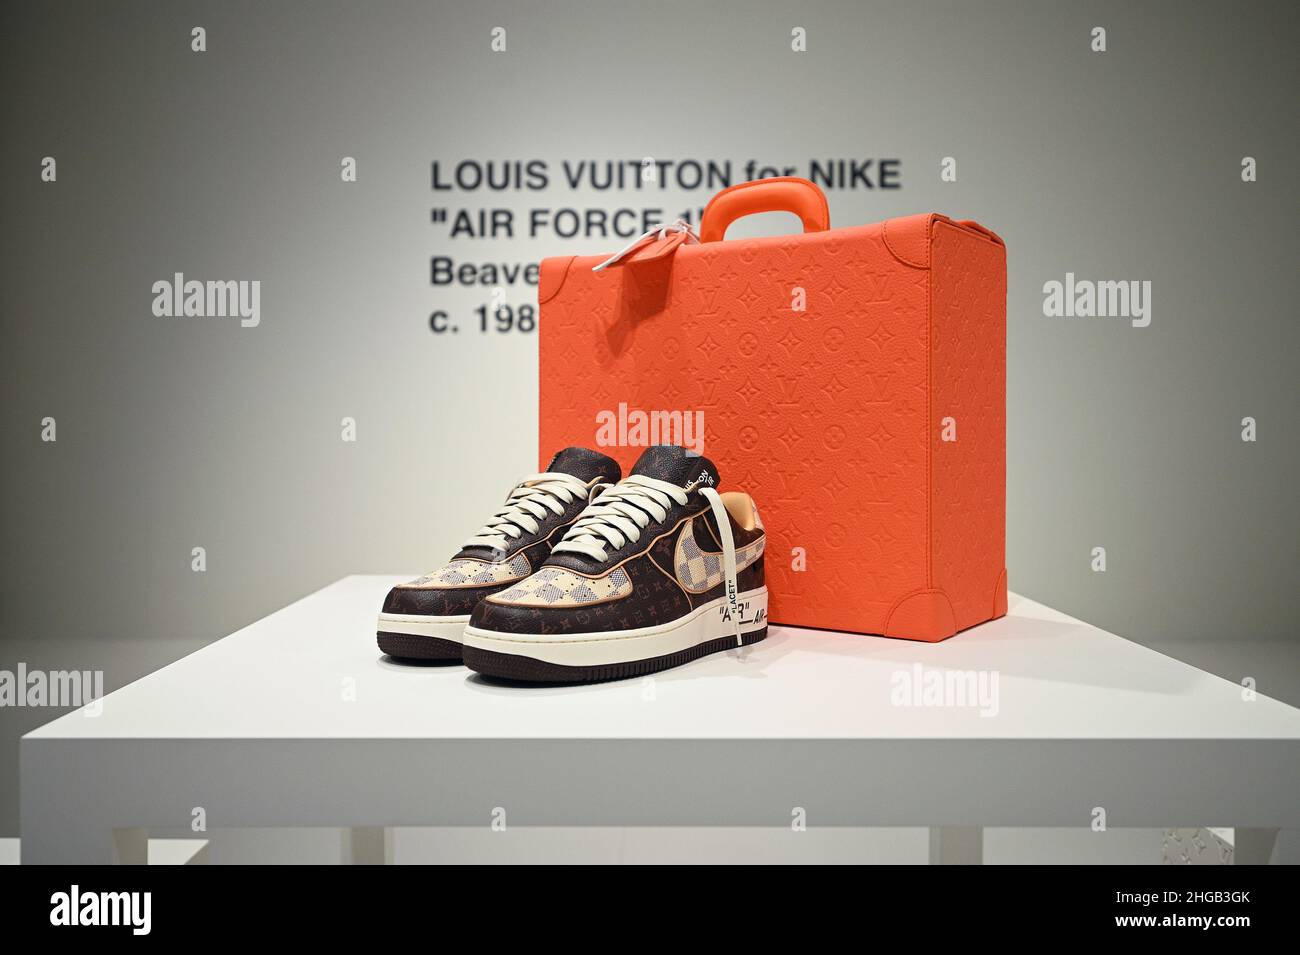 sotheby s nike louis vuittons